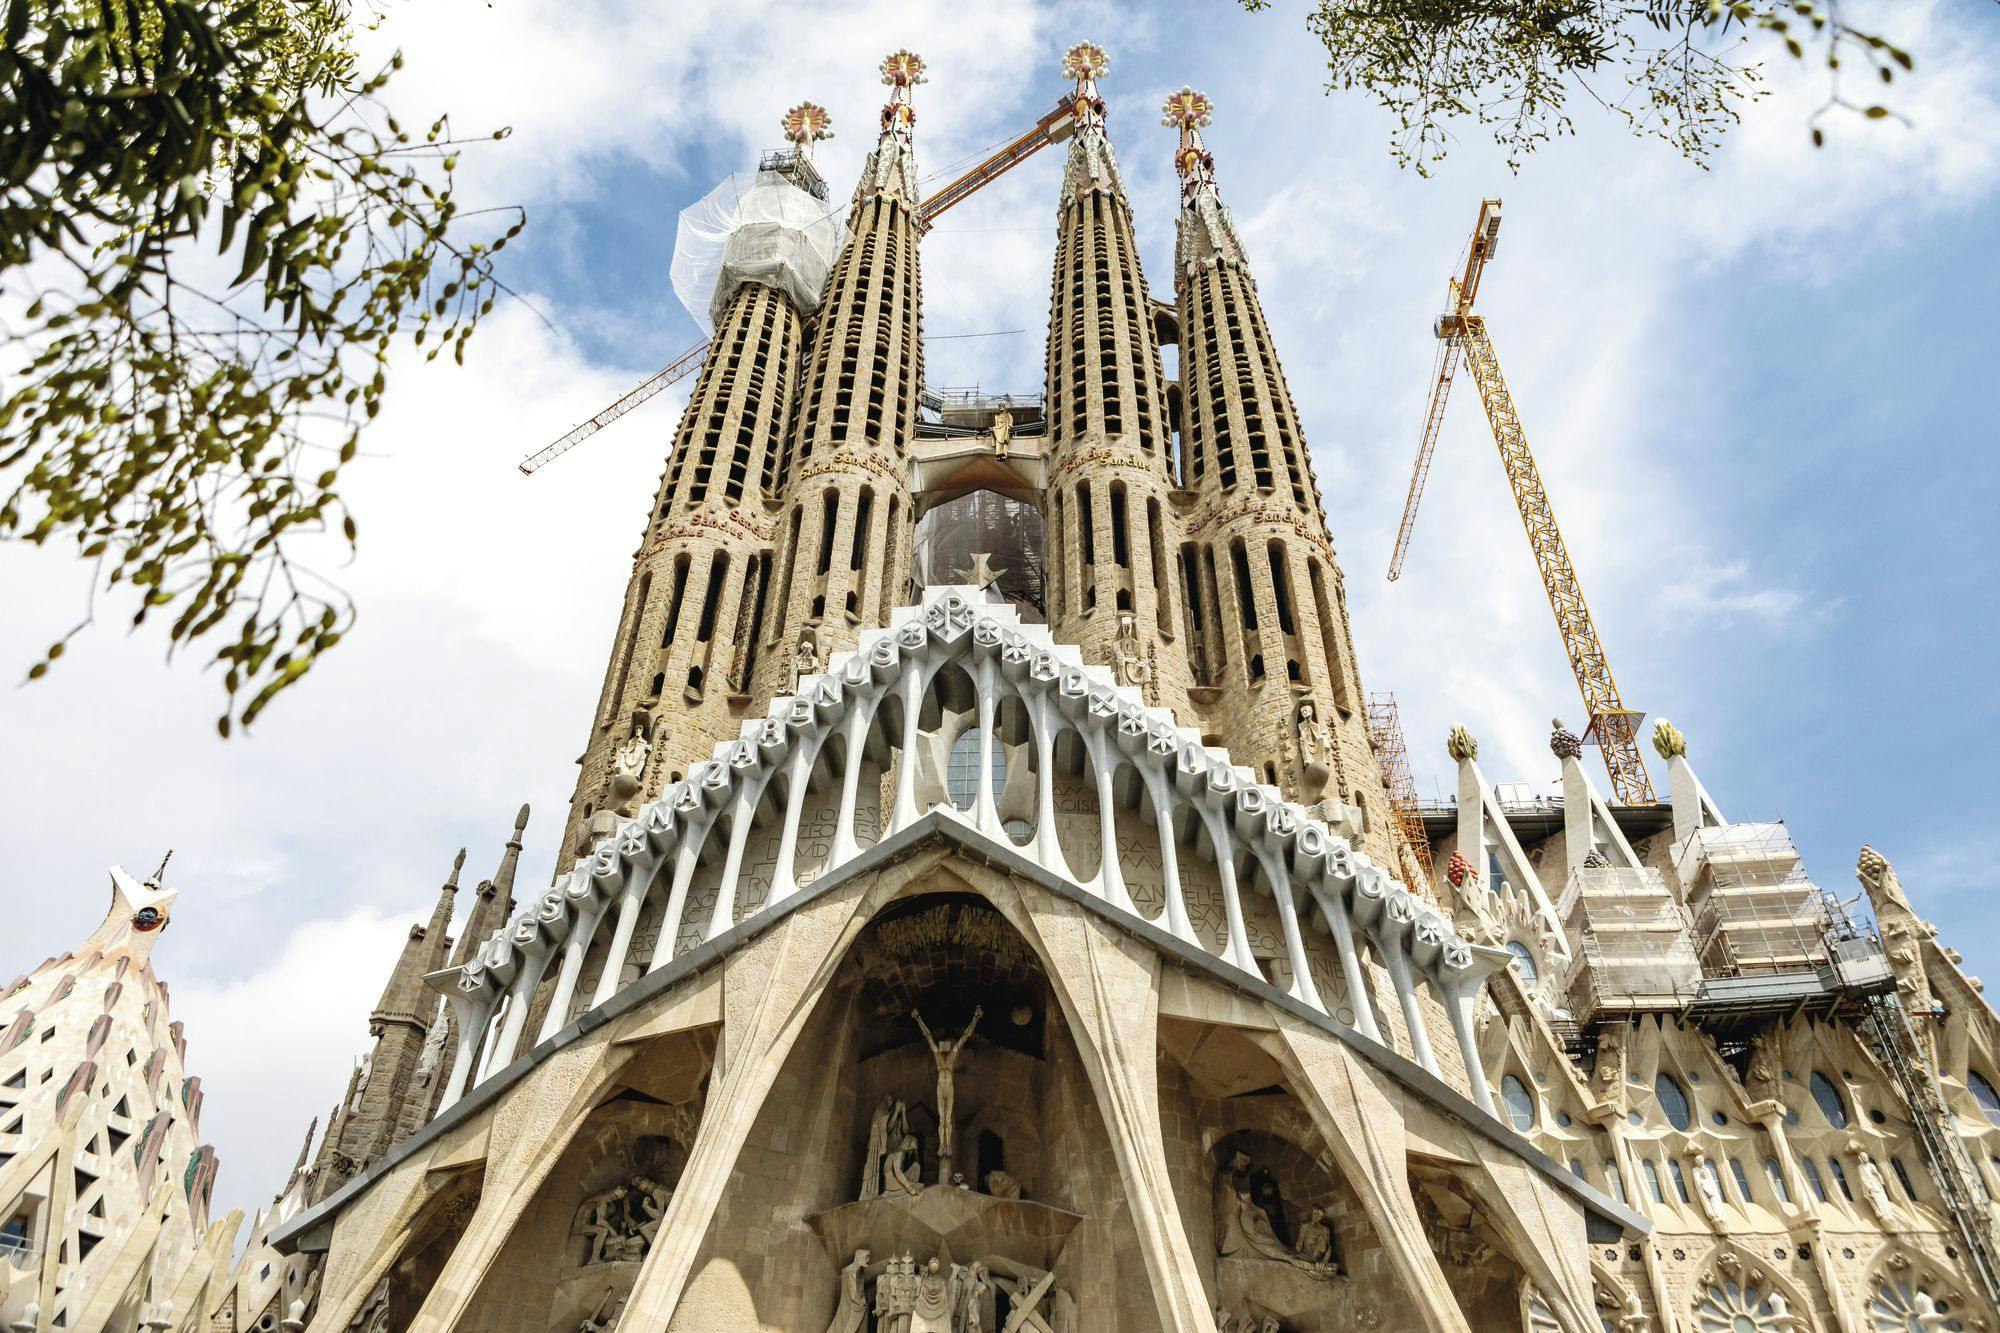 Barcelona Day and Night Tour from the Costa Brava